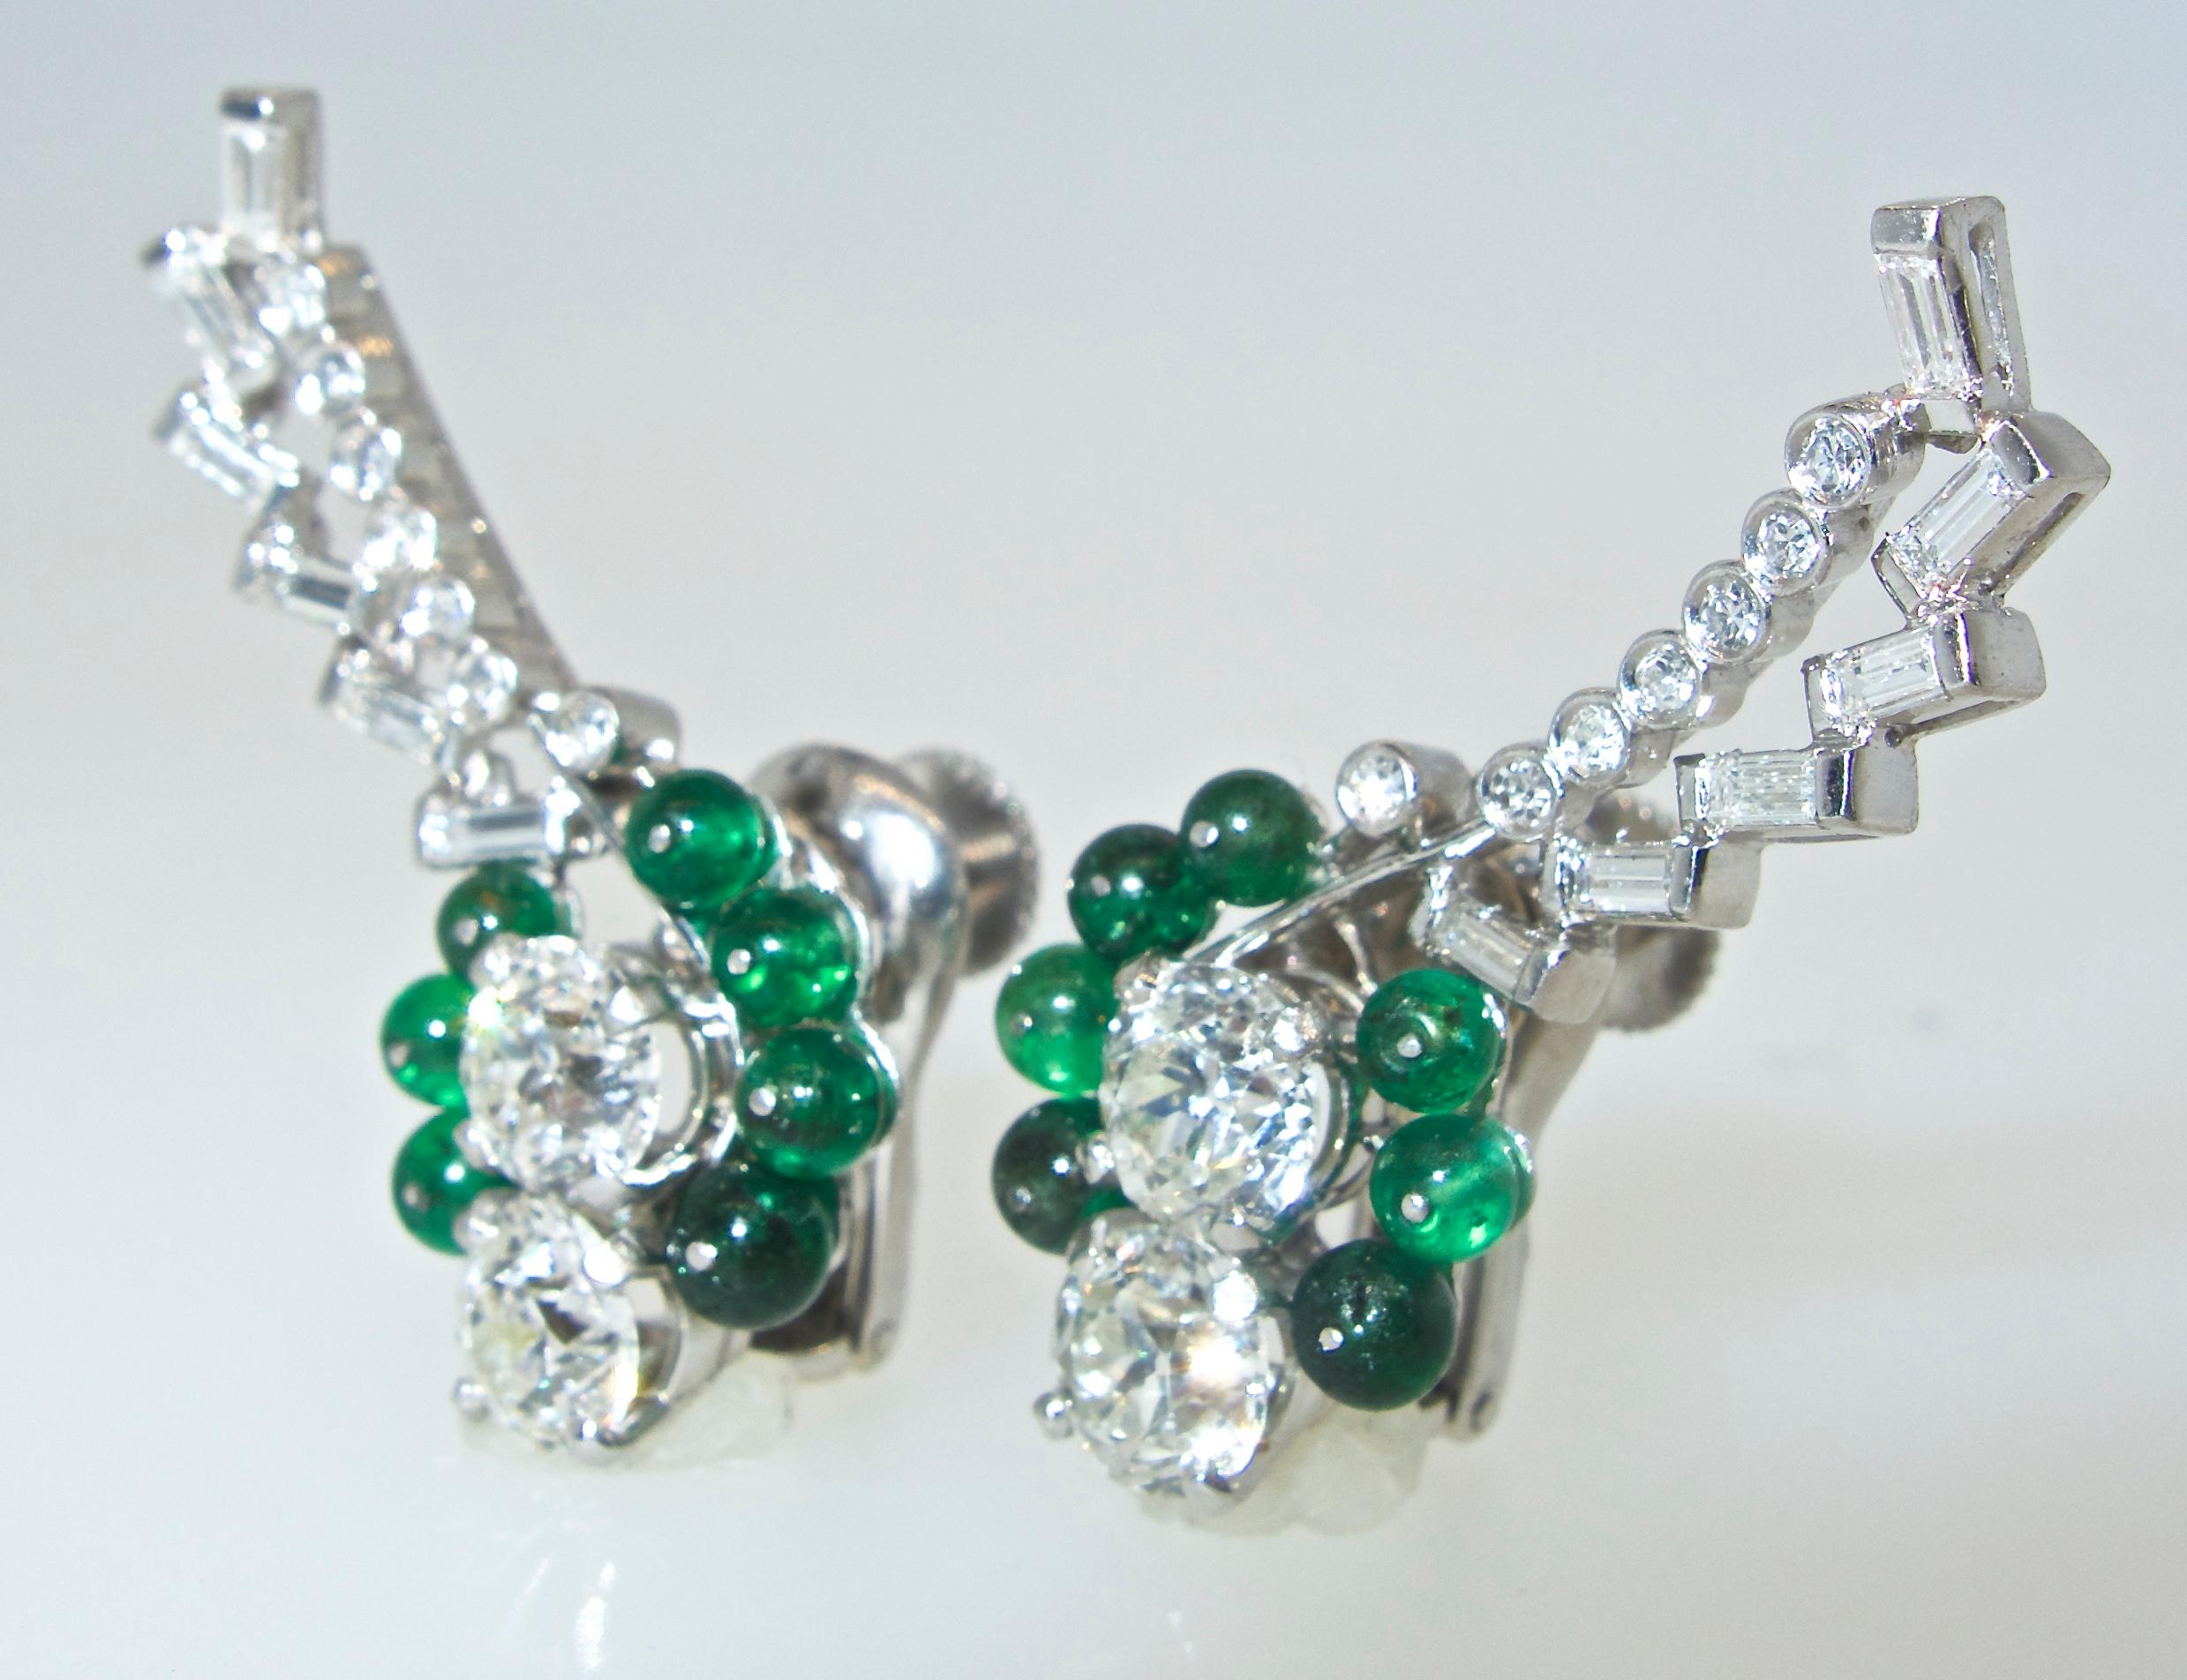 The 14 Colombian natural emerald beads are a vivid bright green color, all well matched. The four center European cut diamonds weigh approximately 3.0 cts.,  The six baguette cut diamonds weigh approximately .25 cts., the smaller round diamonds